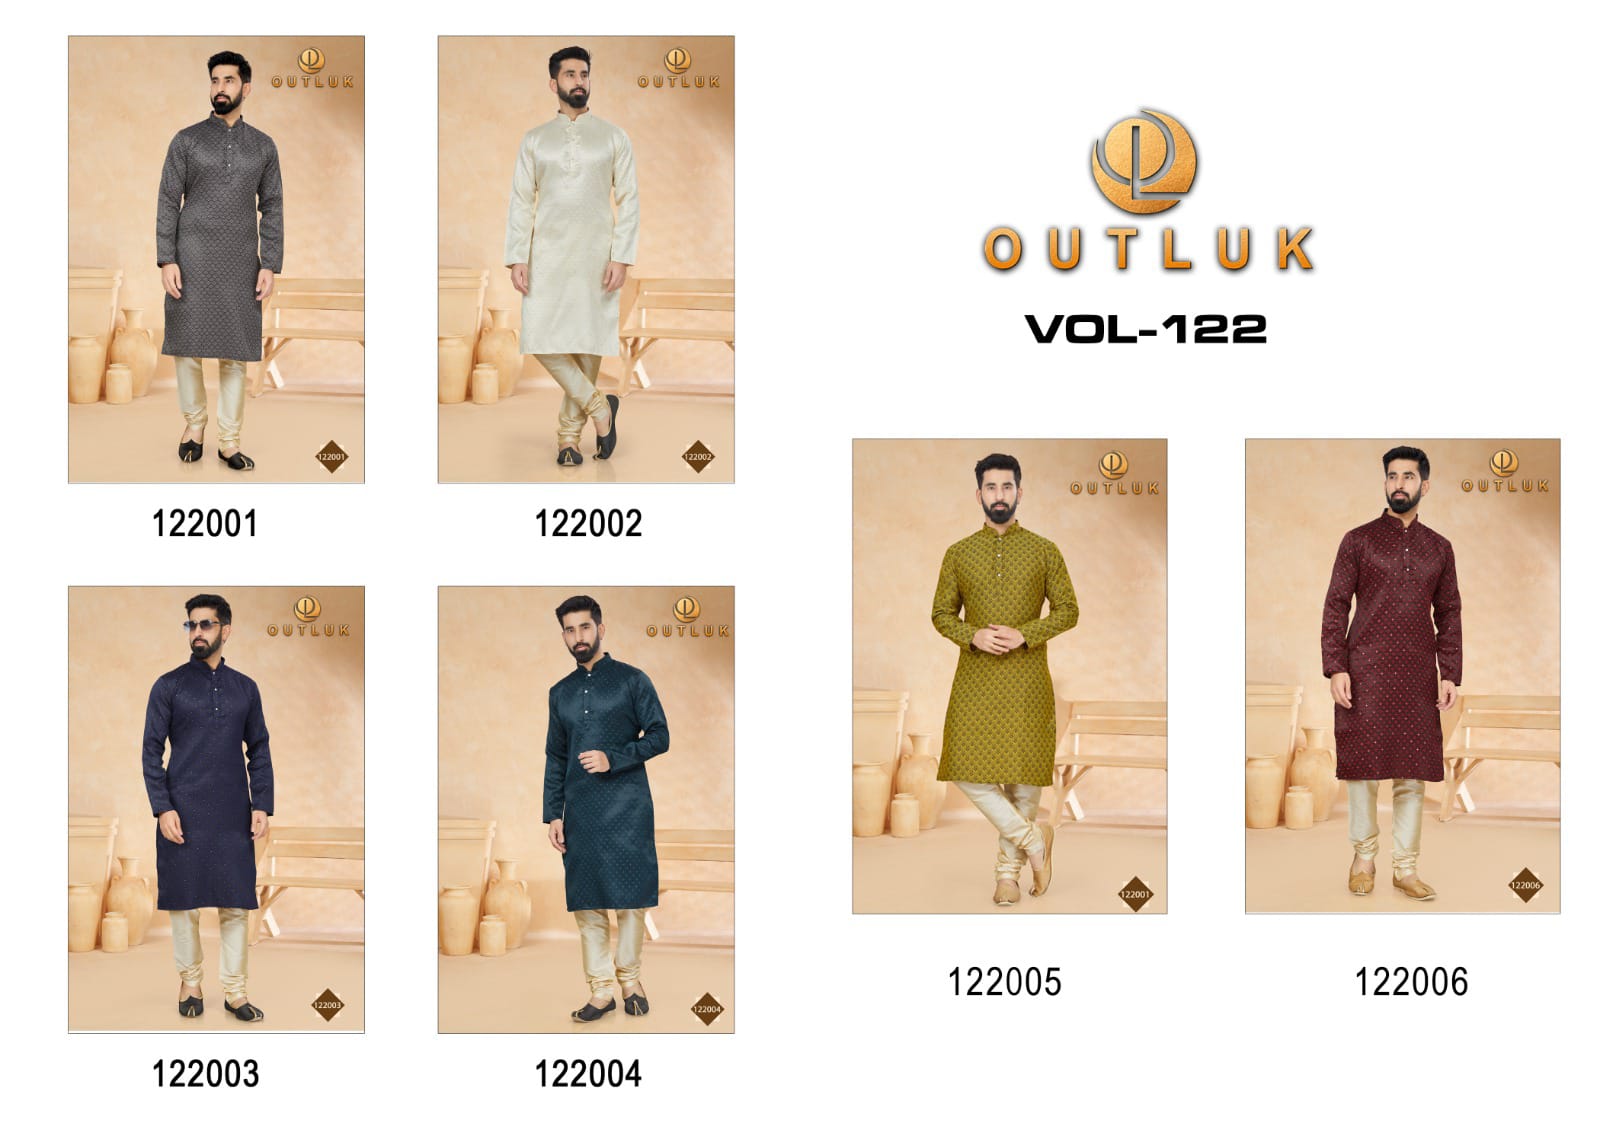 Outluk Vol 122 collection 3